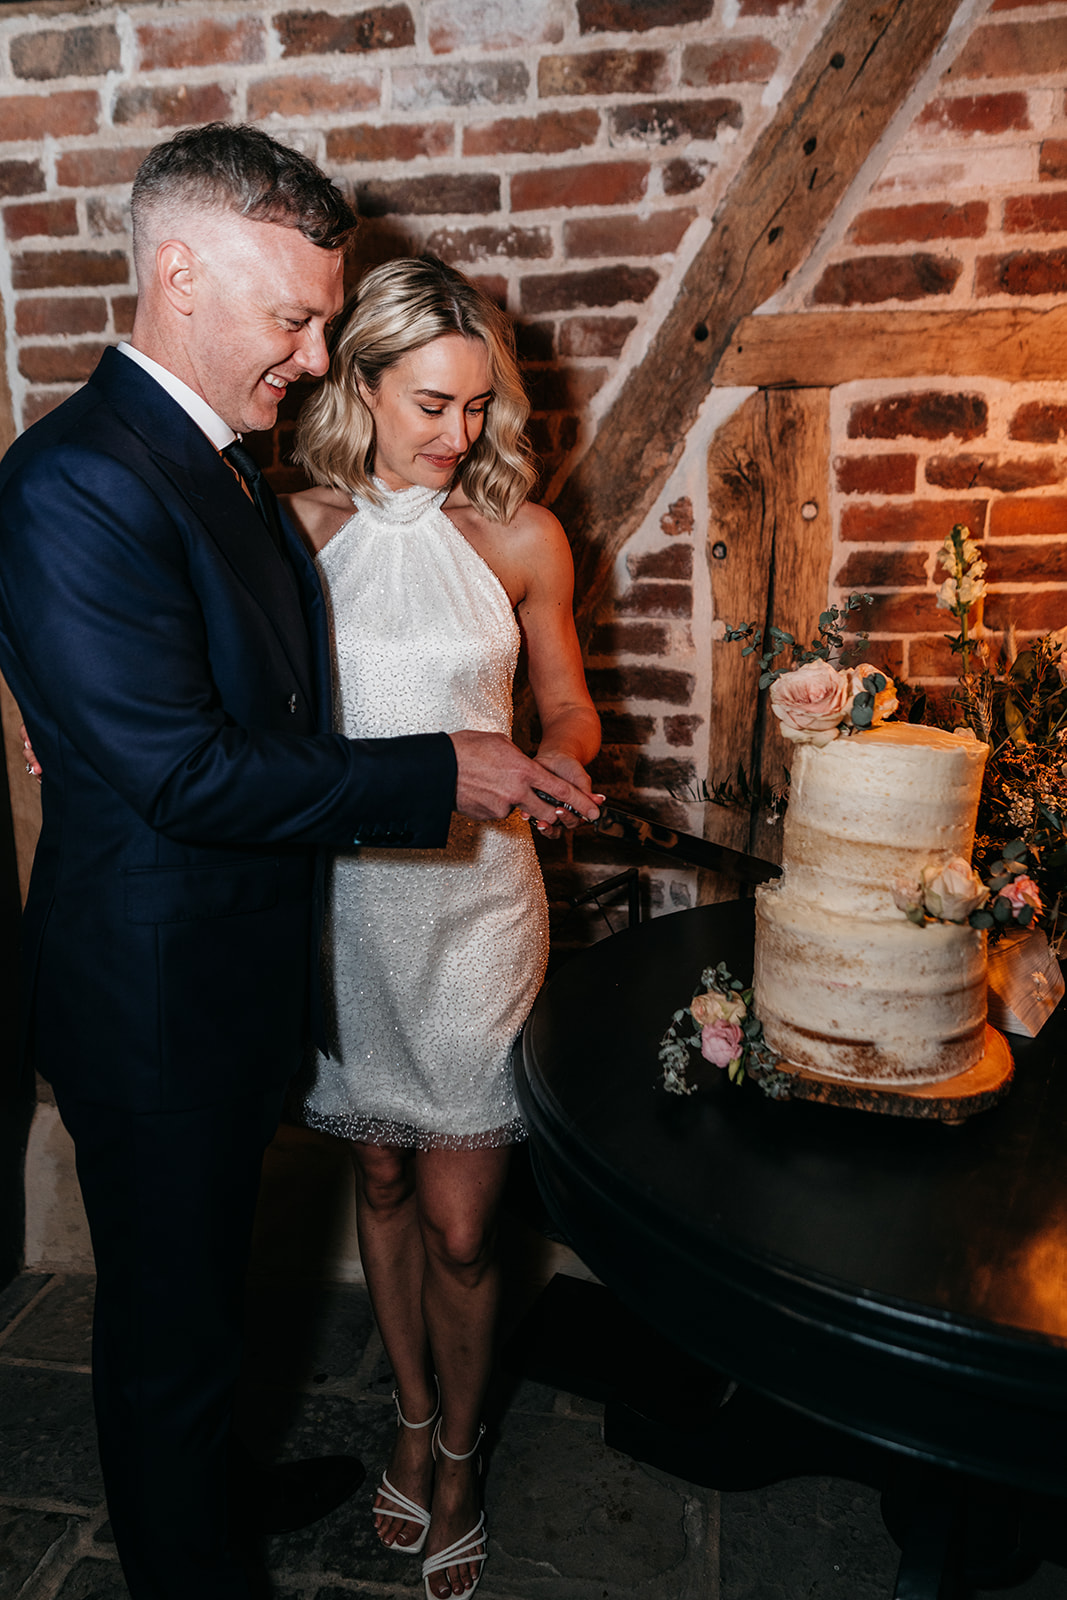 The bride and groom cut the wedding cake